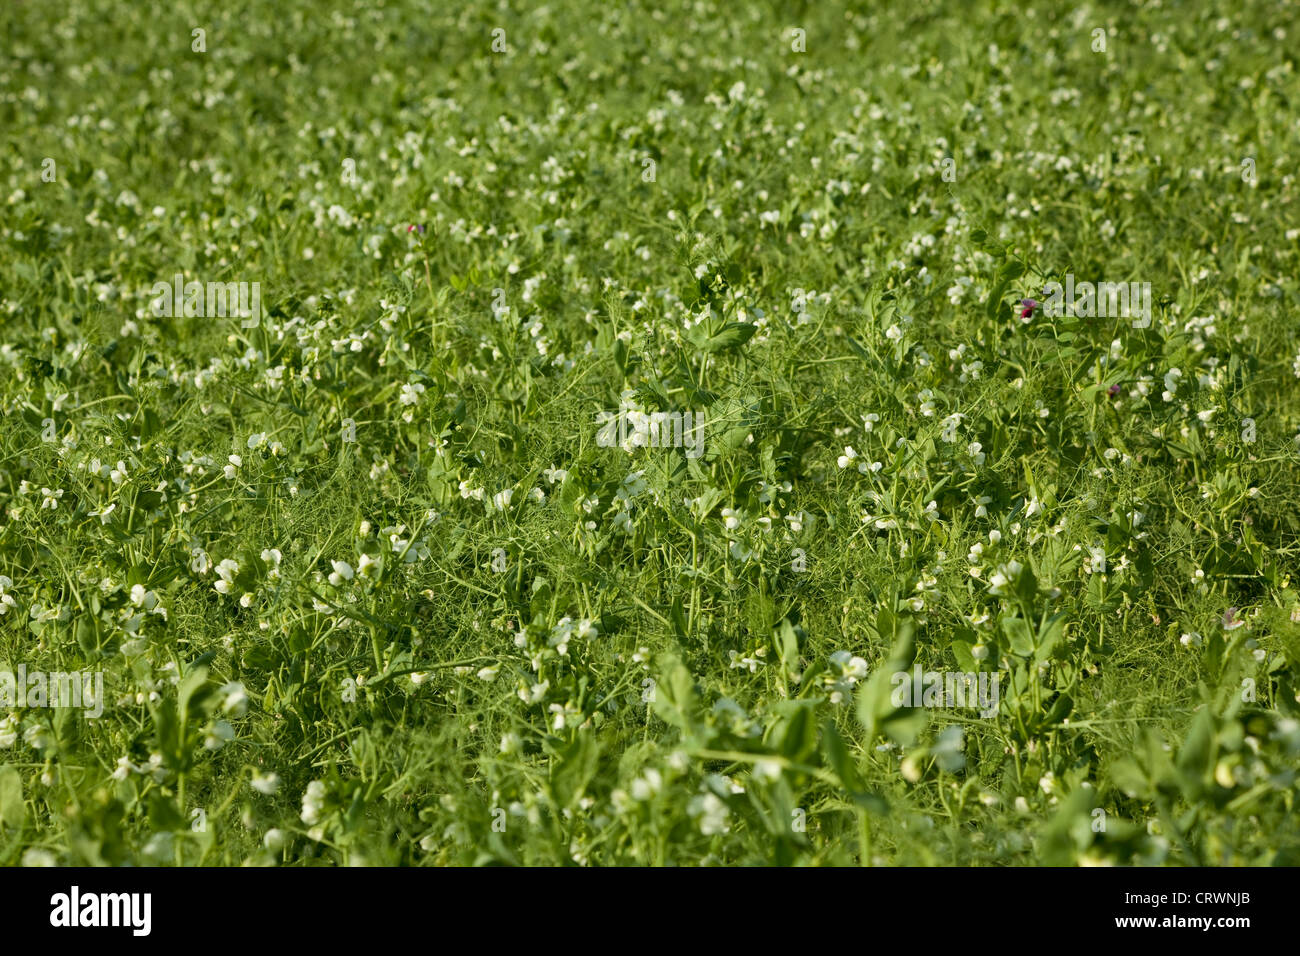 rows of planted peas on agricultural field Stock Photo